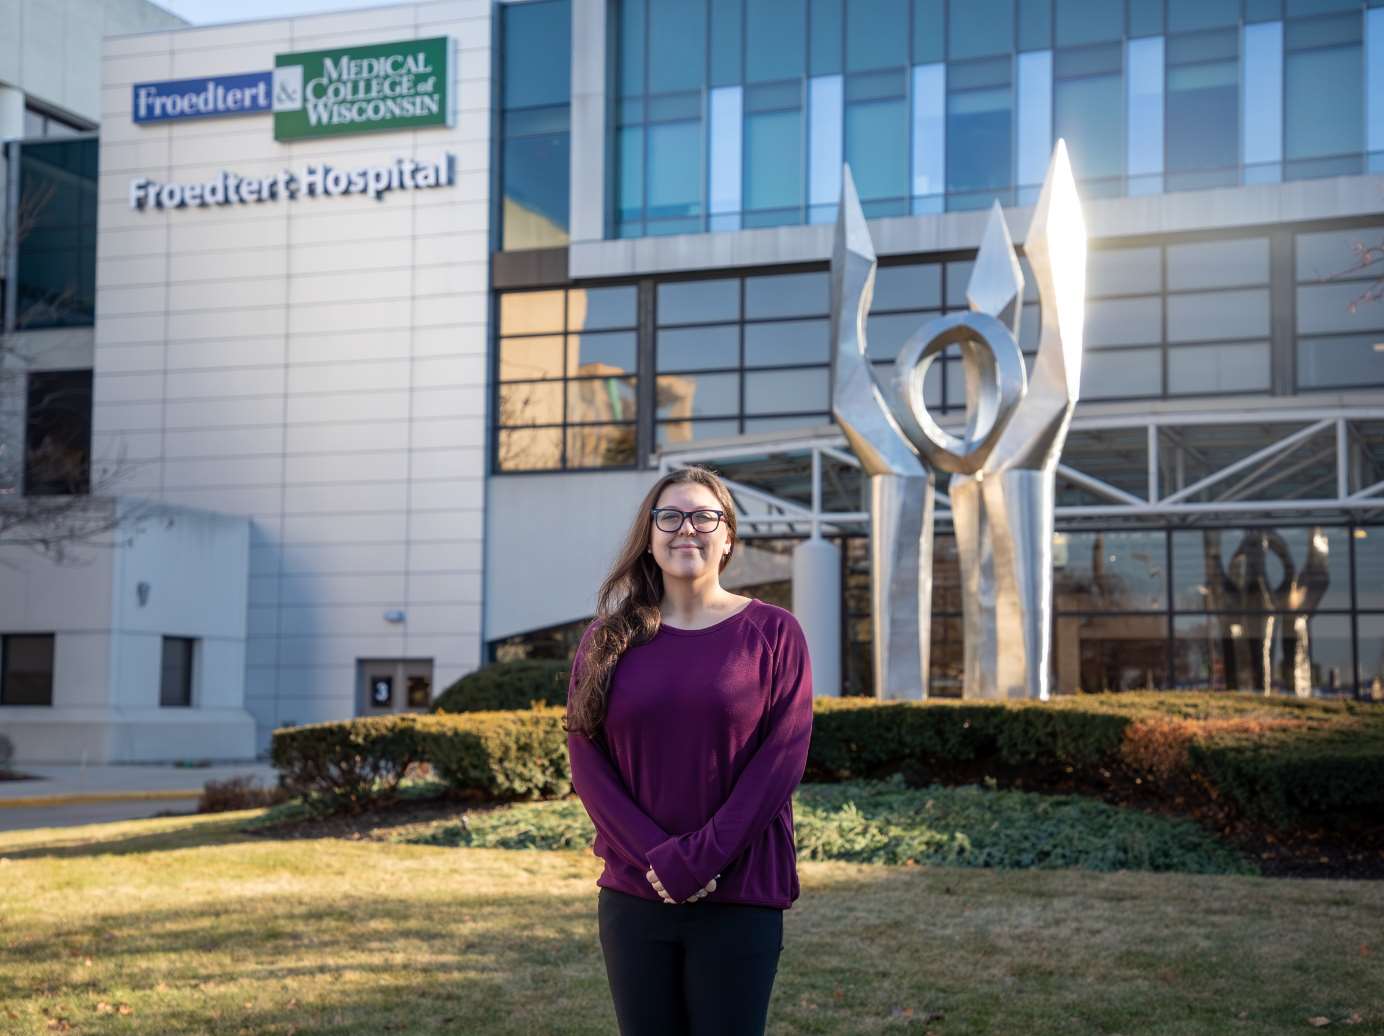 MCW School of Pharmacy alumna and Froedtert Hospital resident aspires to infectious diseases career